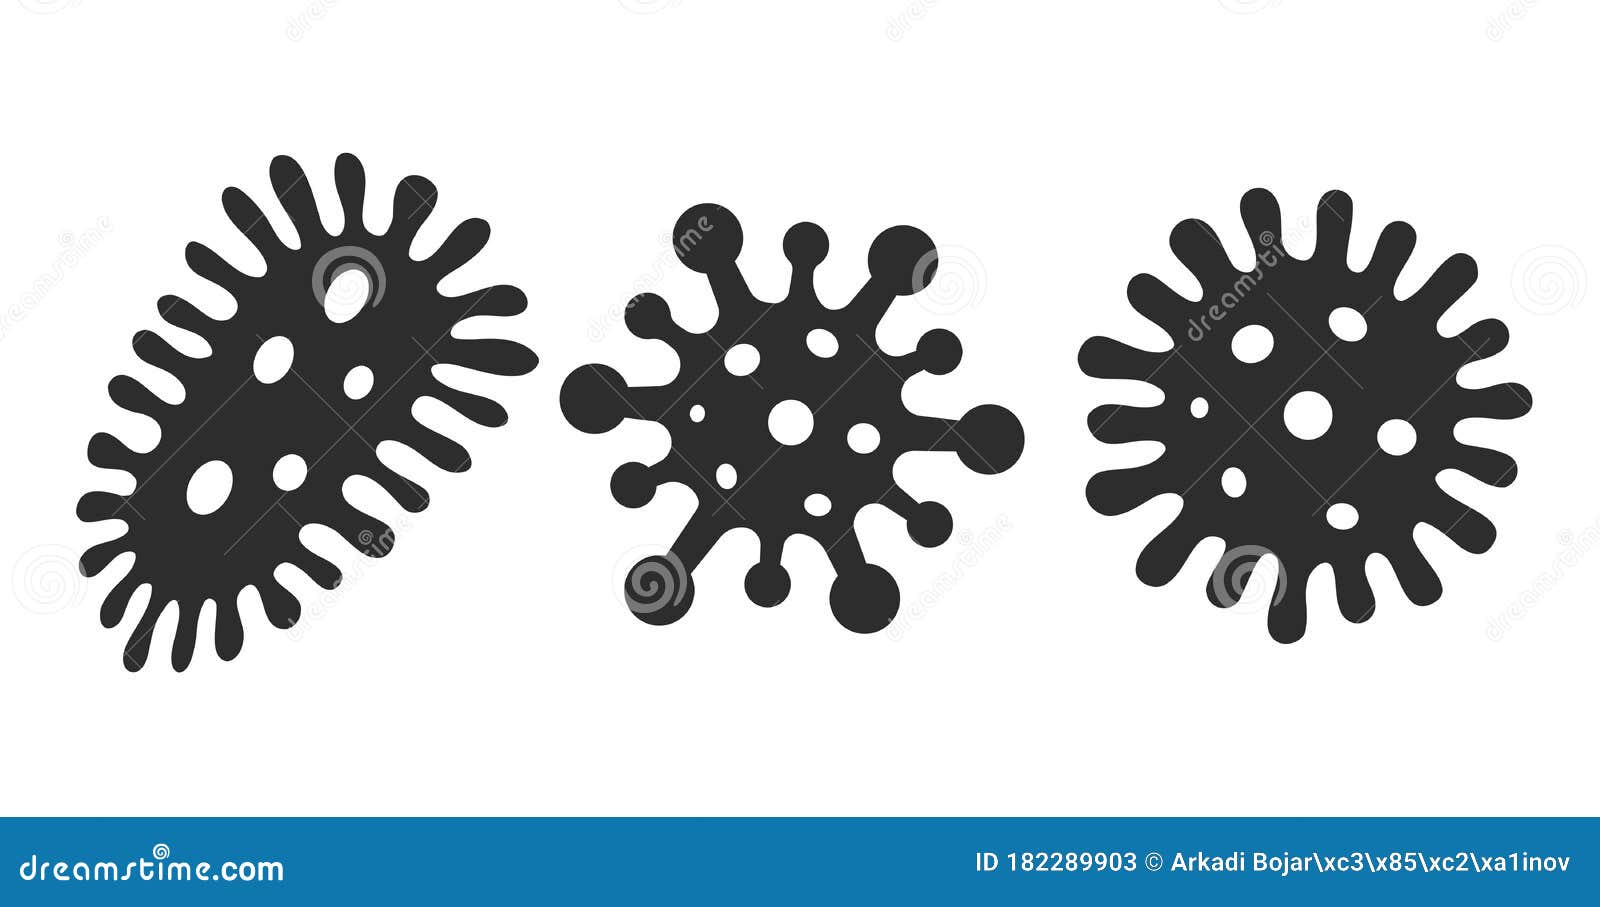 germs, viruses and microbes  icon